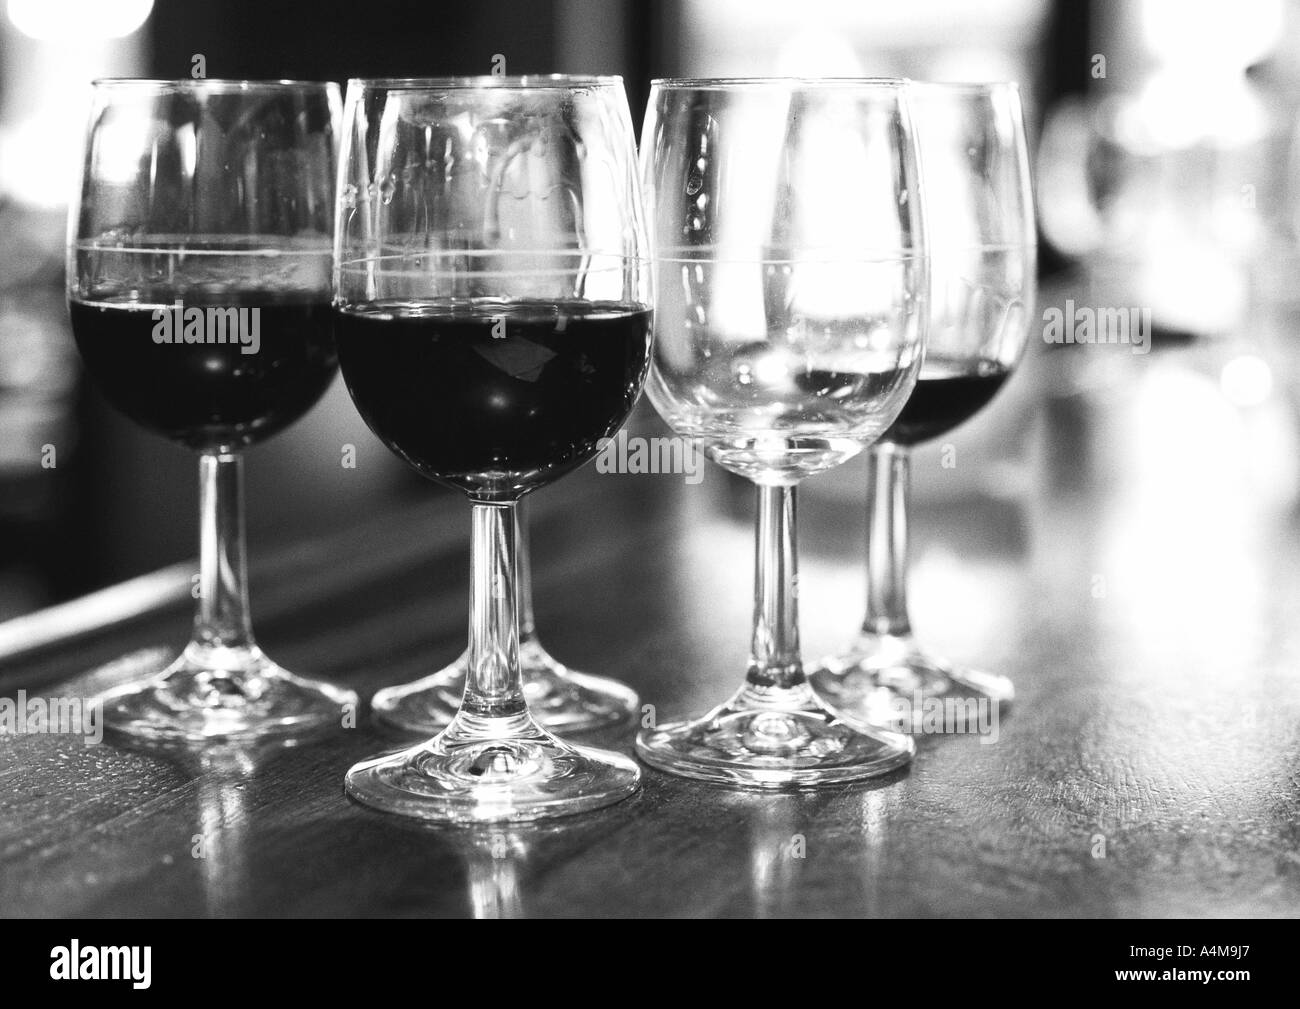 Glasses of wine on bar counter Stock Photo